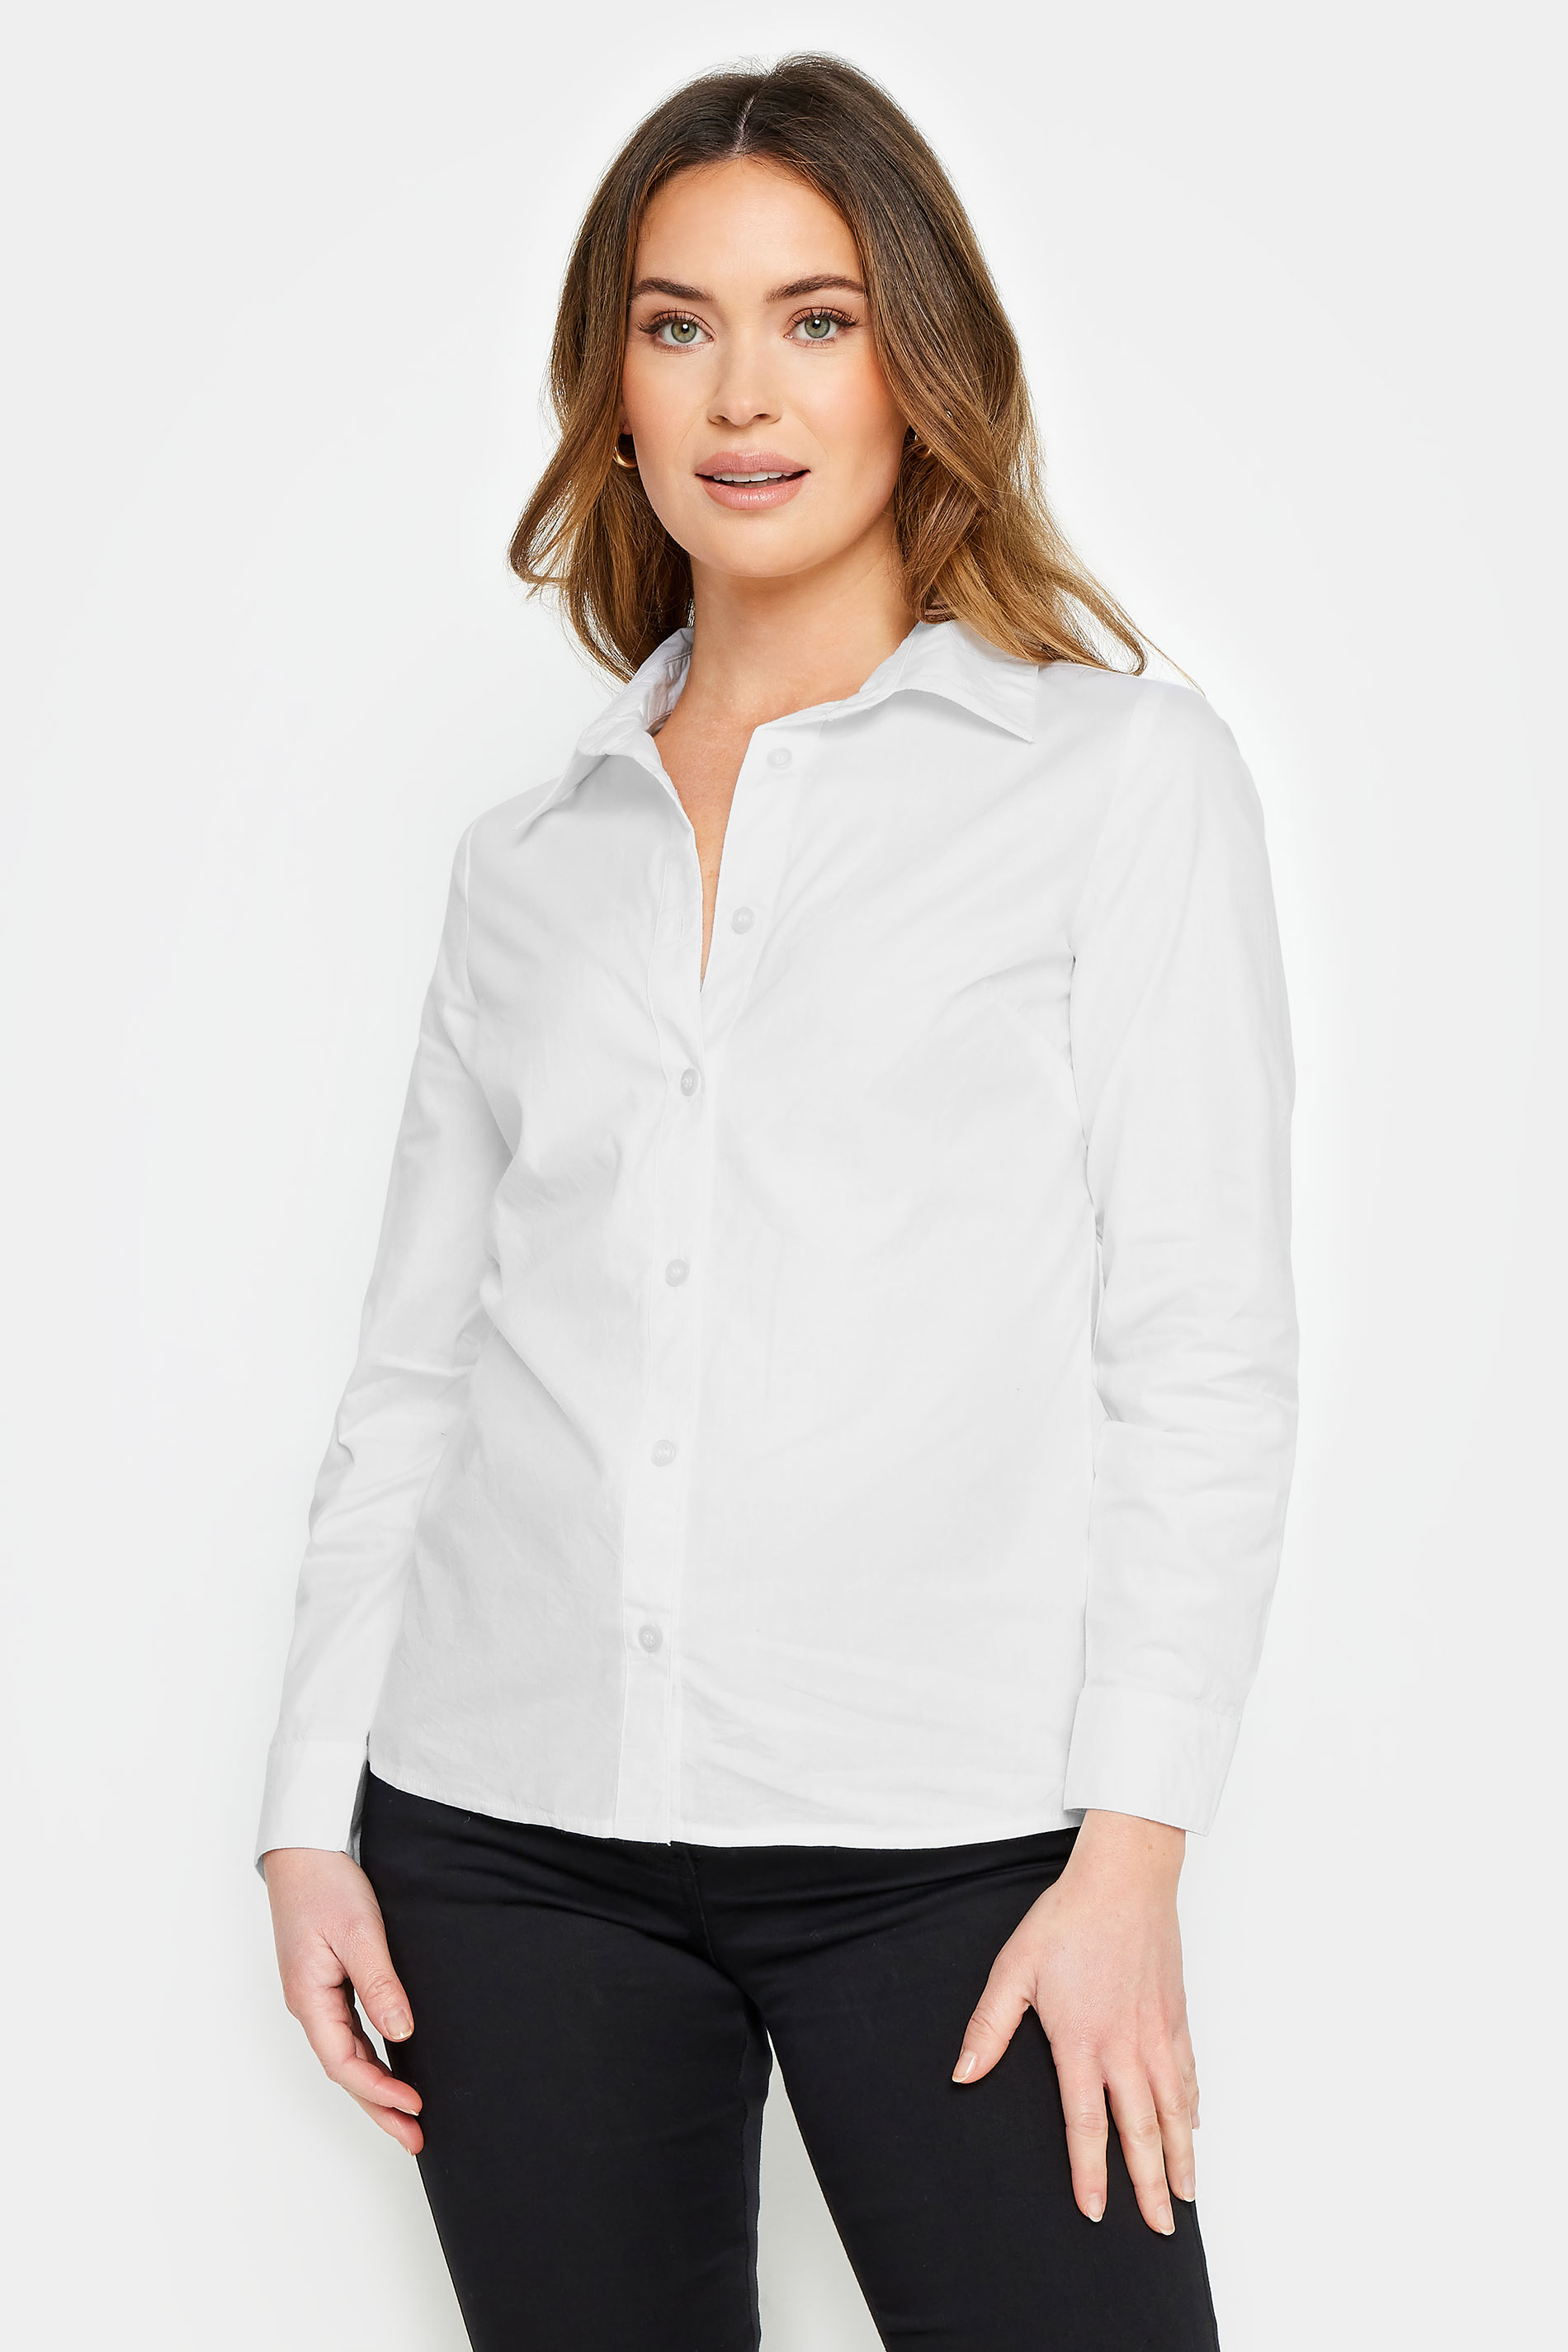 M&Co Petite White Fitted Cotton Poplin Shirt | M&Co